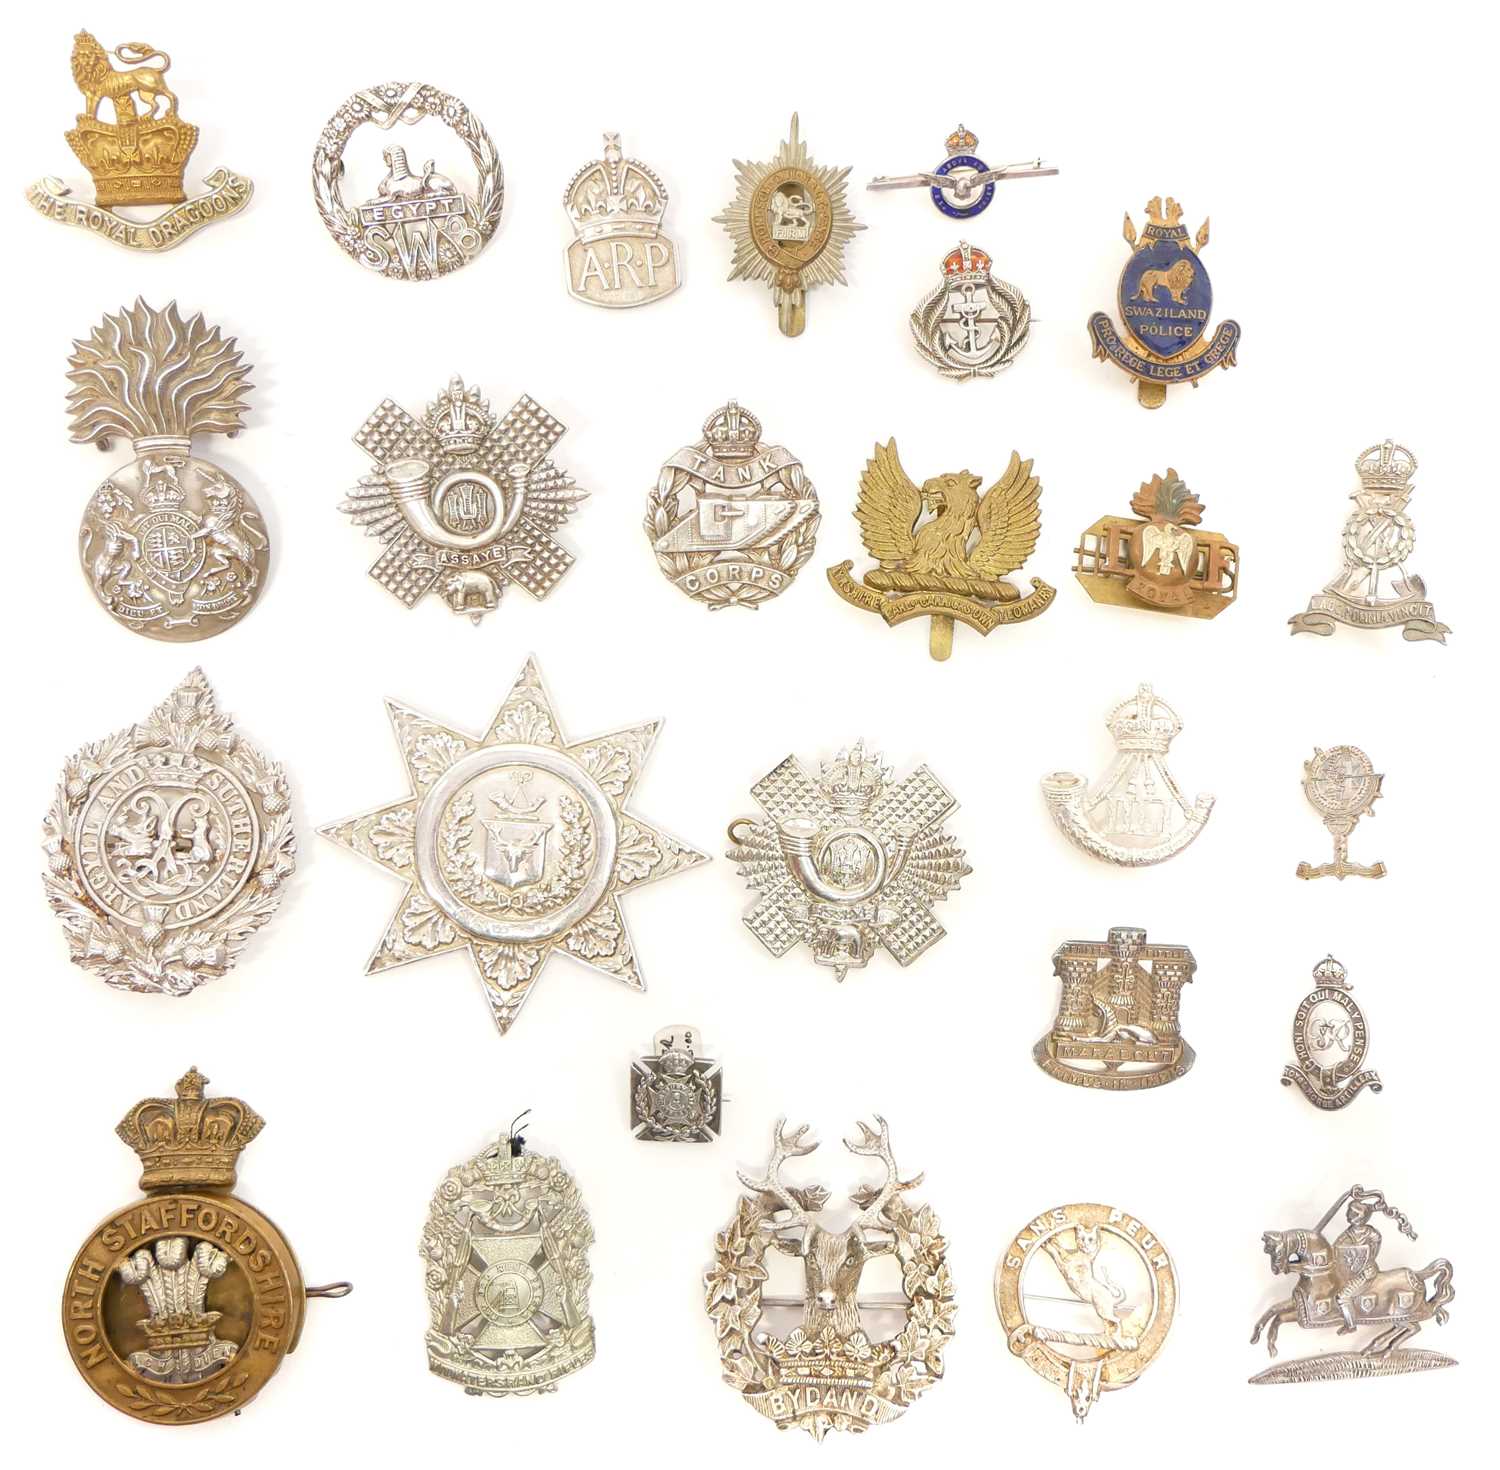 Twenty six British Army cap badges and Scottish clan badges, ten of which are Sterling silver.